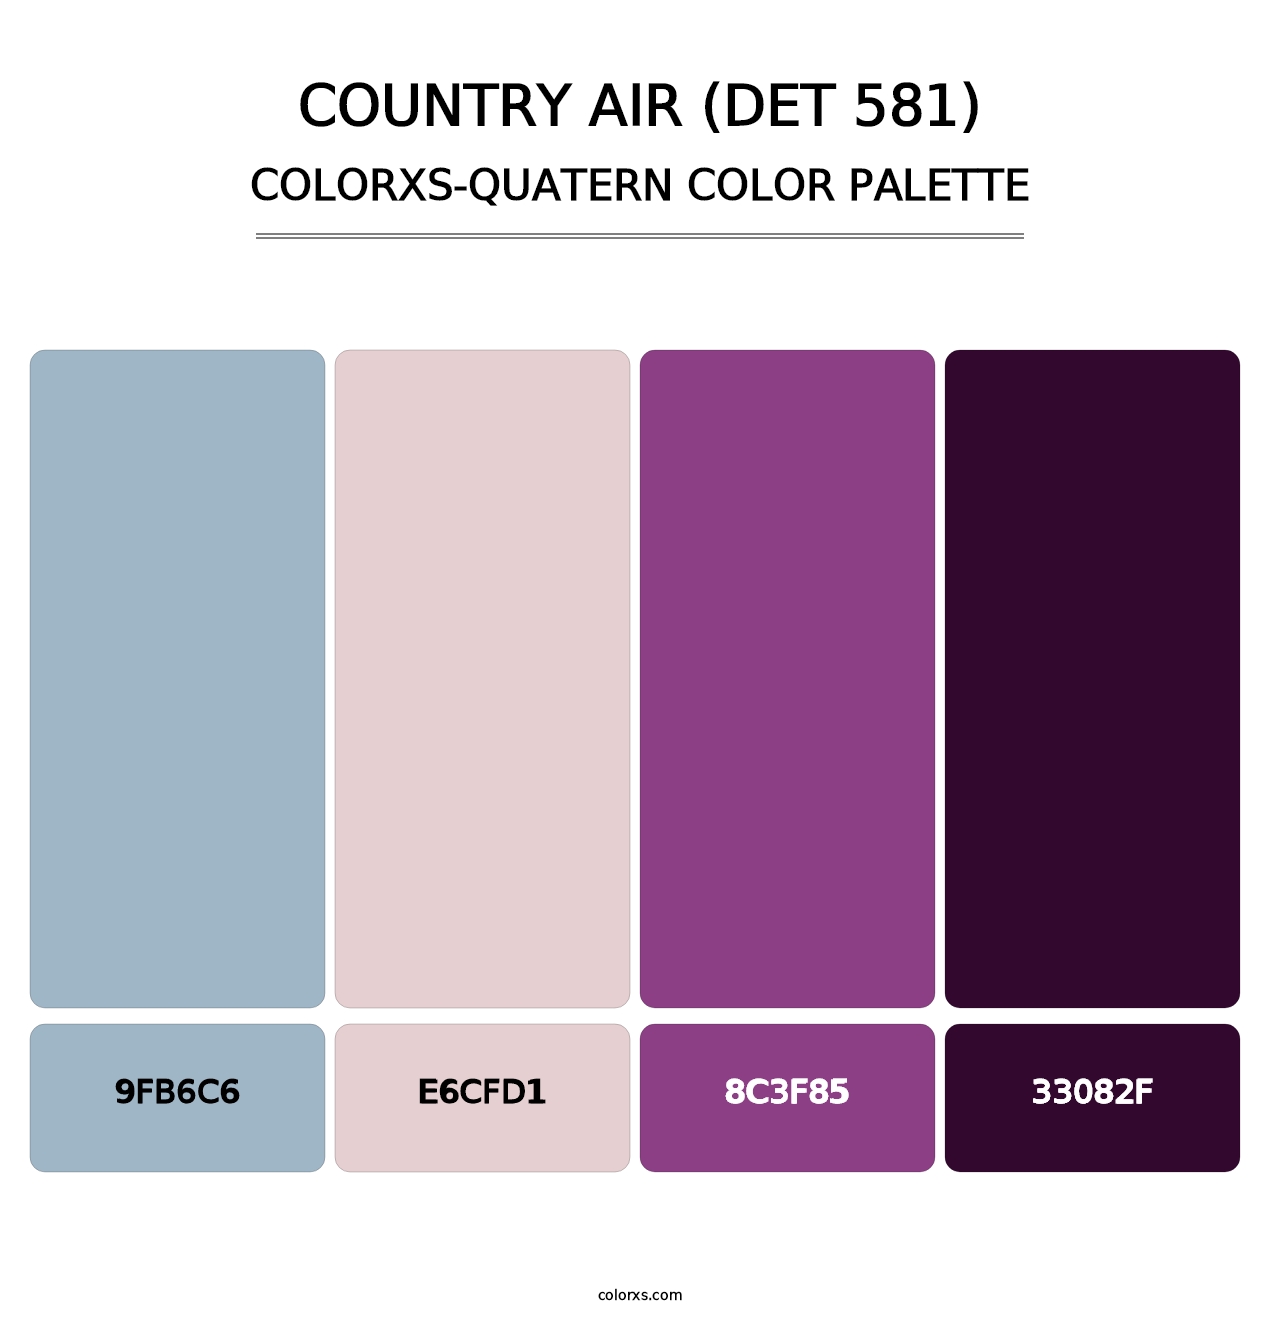 Country Air (DET 581) - Colorxs Quatern Palette